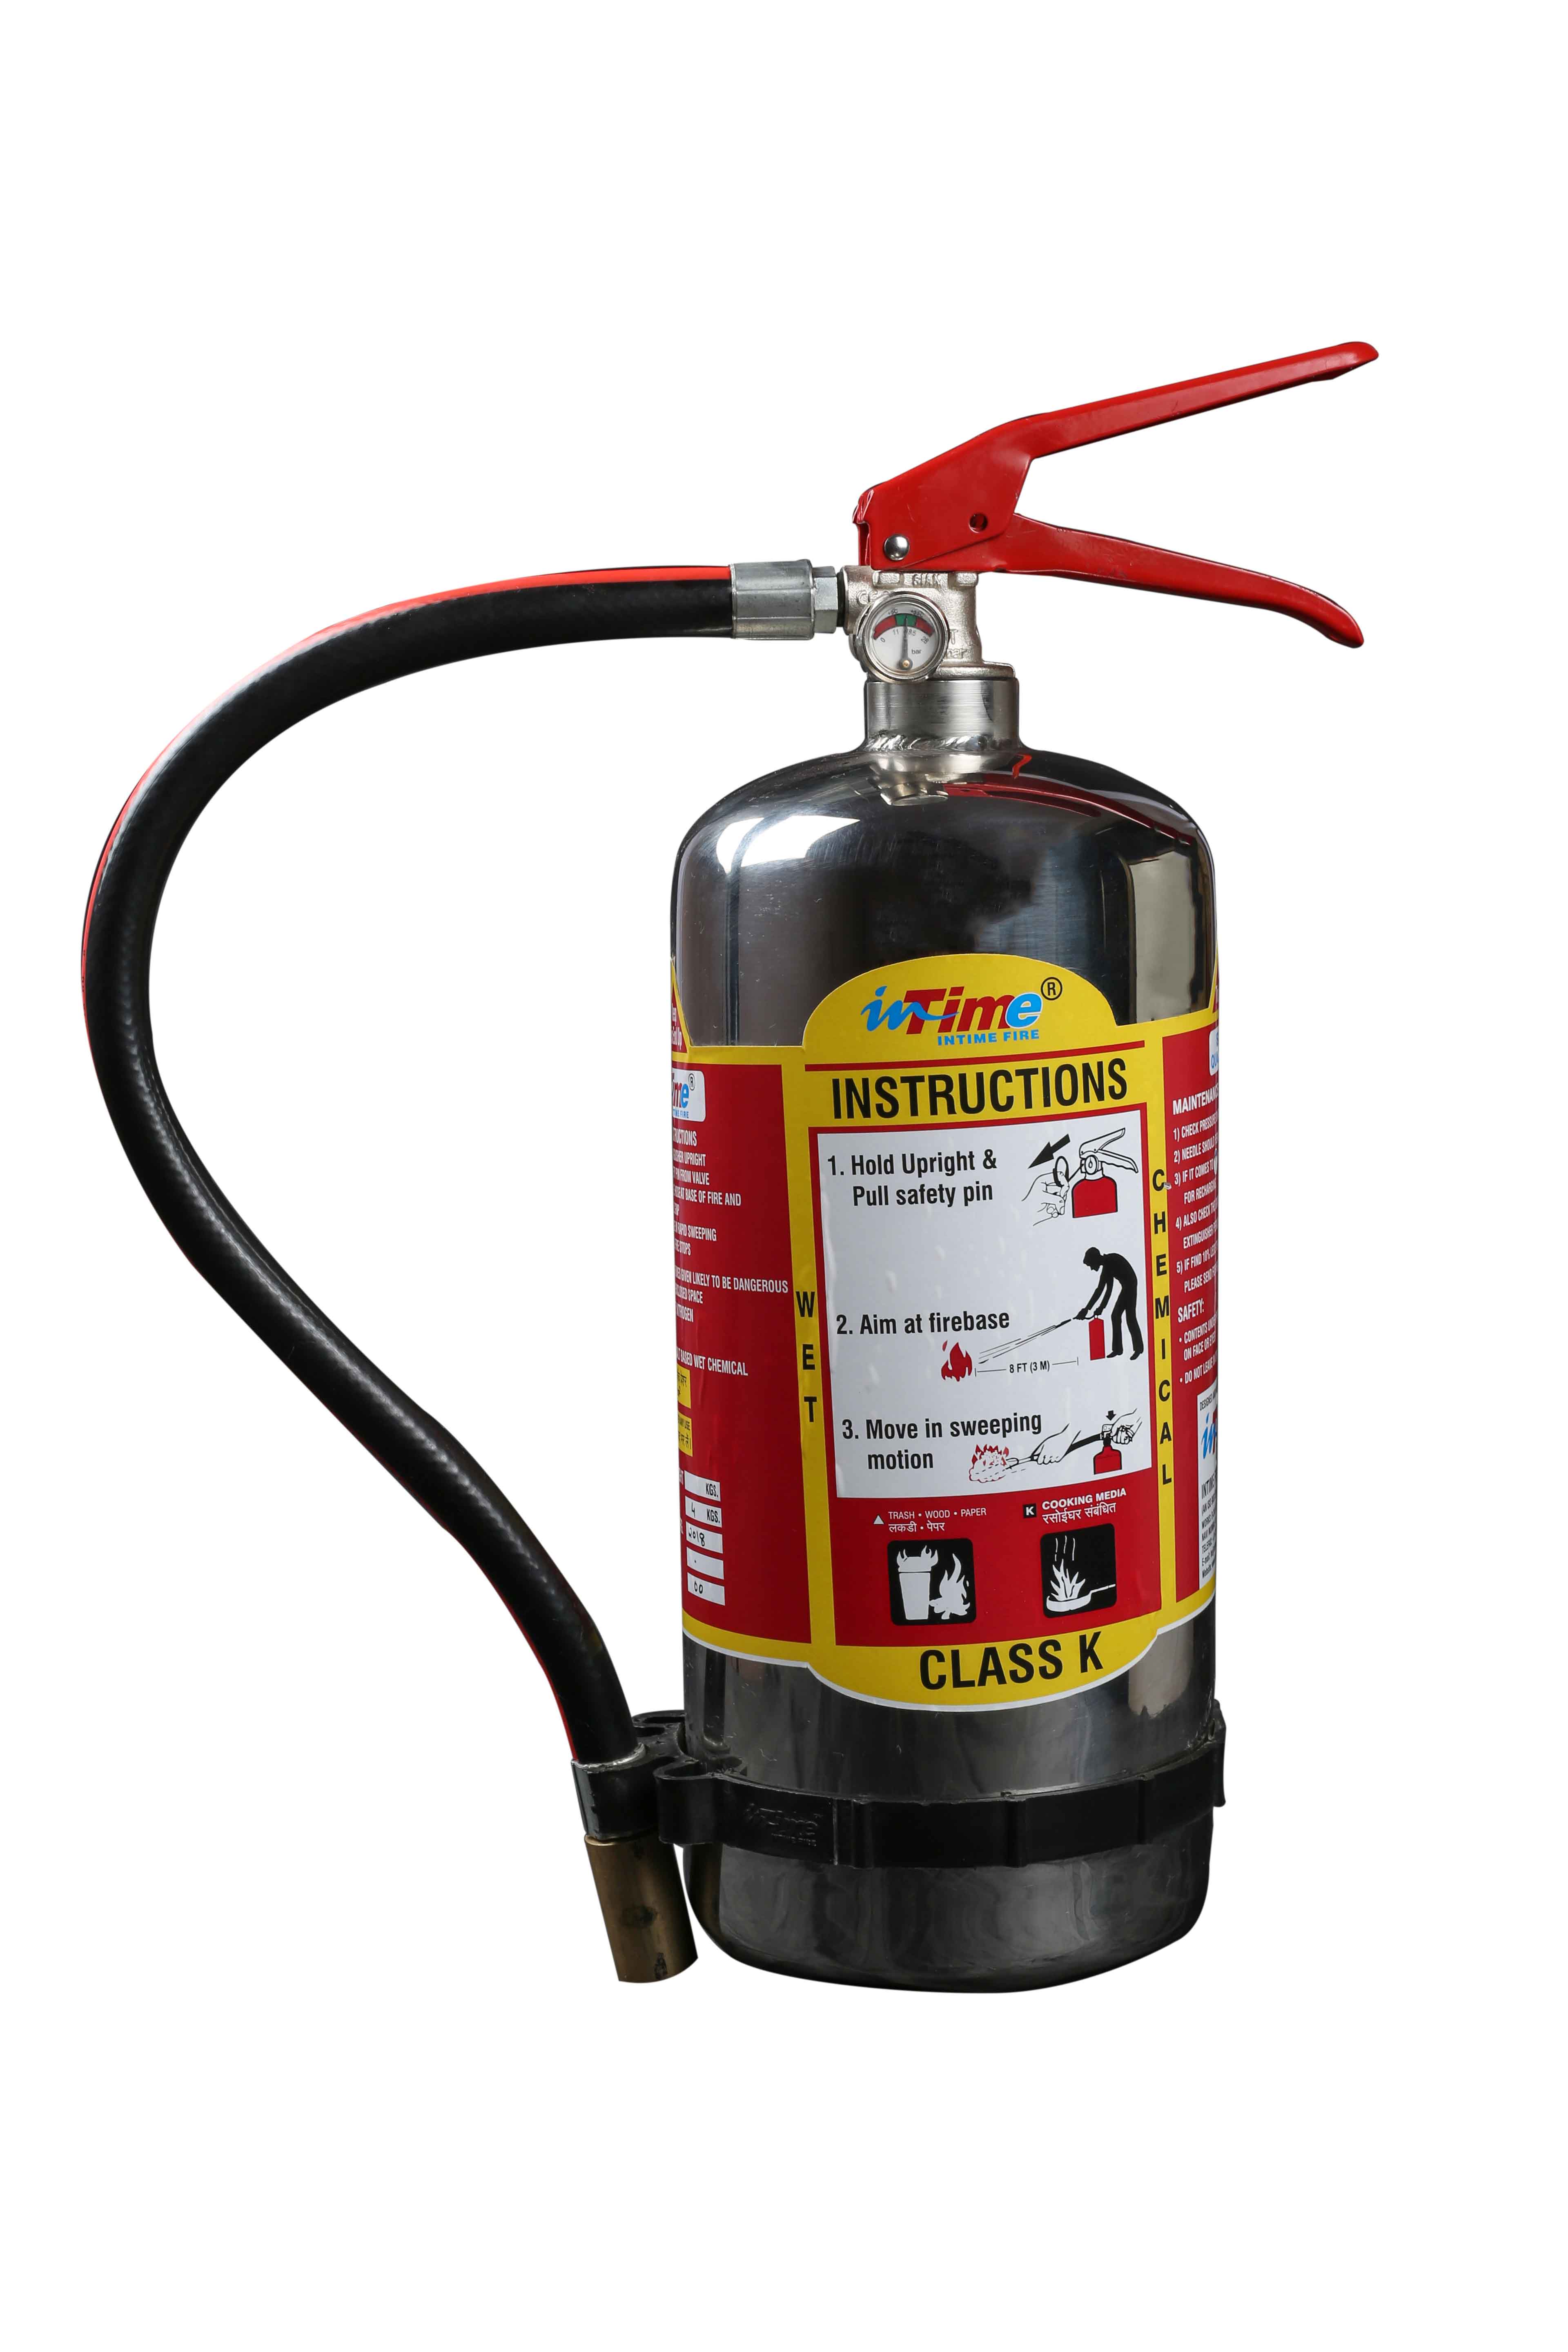 Fire Extinguishers For Kitchen Fire Intimefire